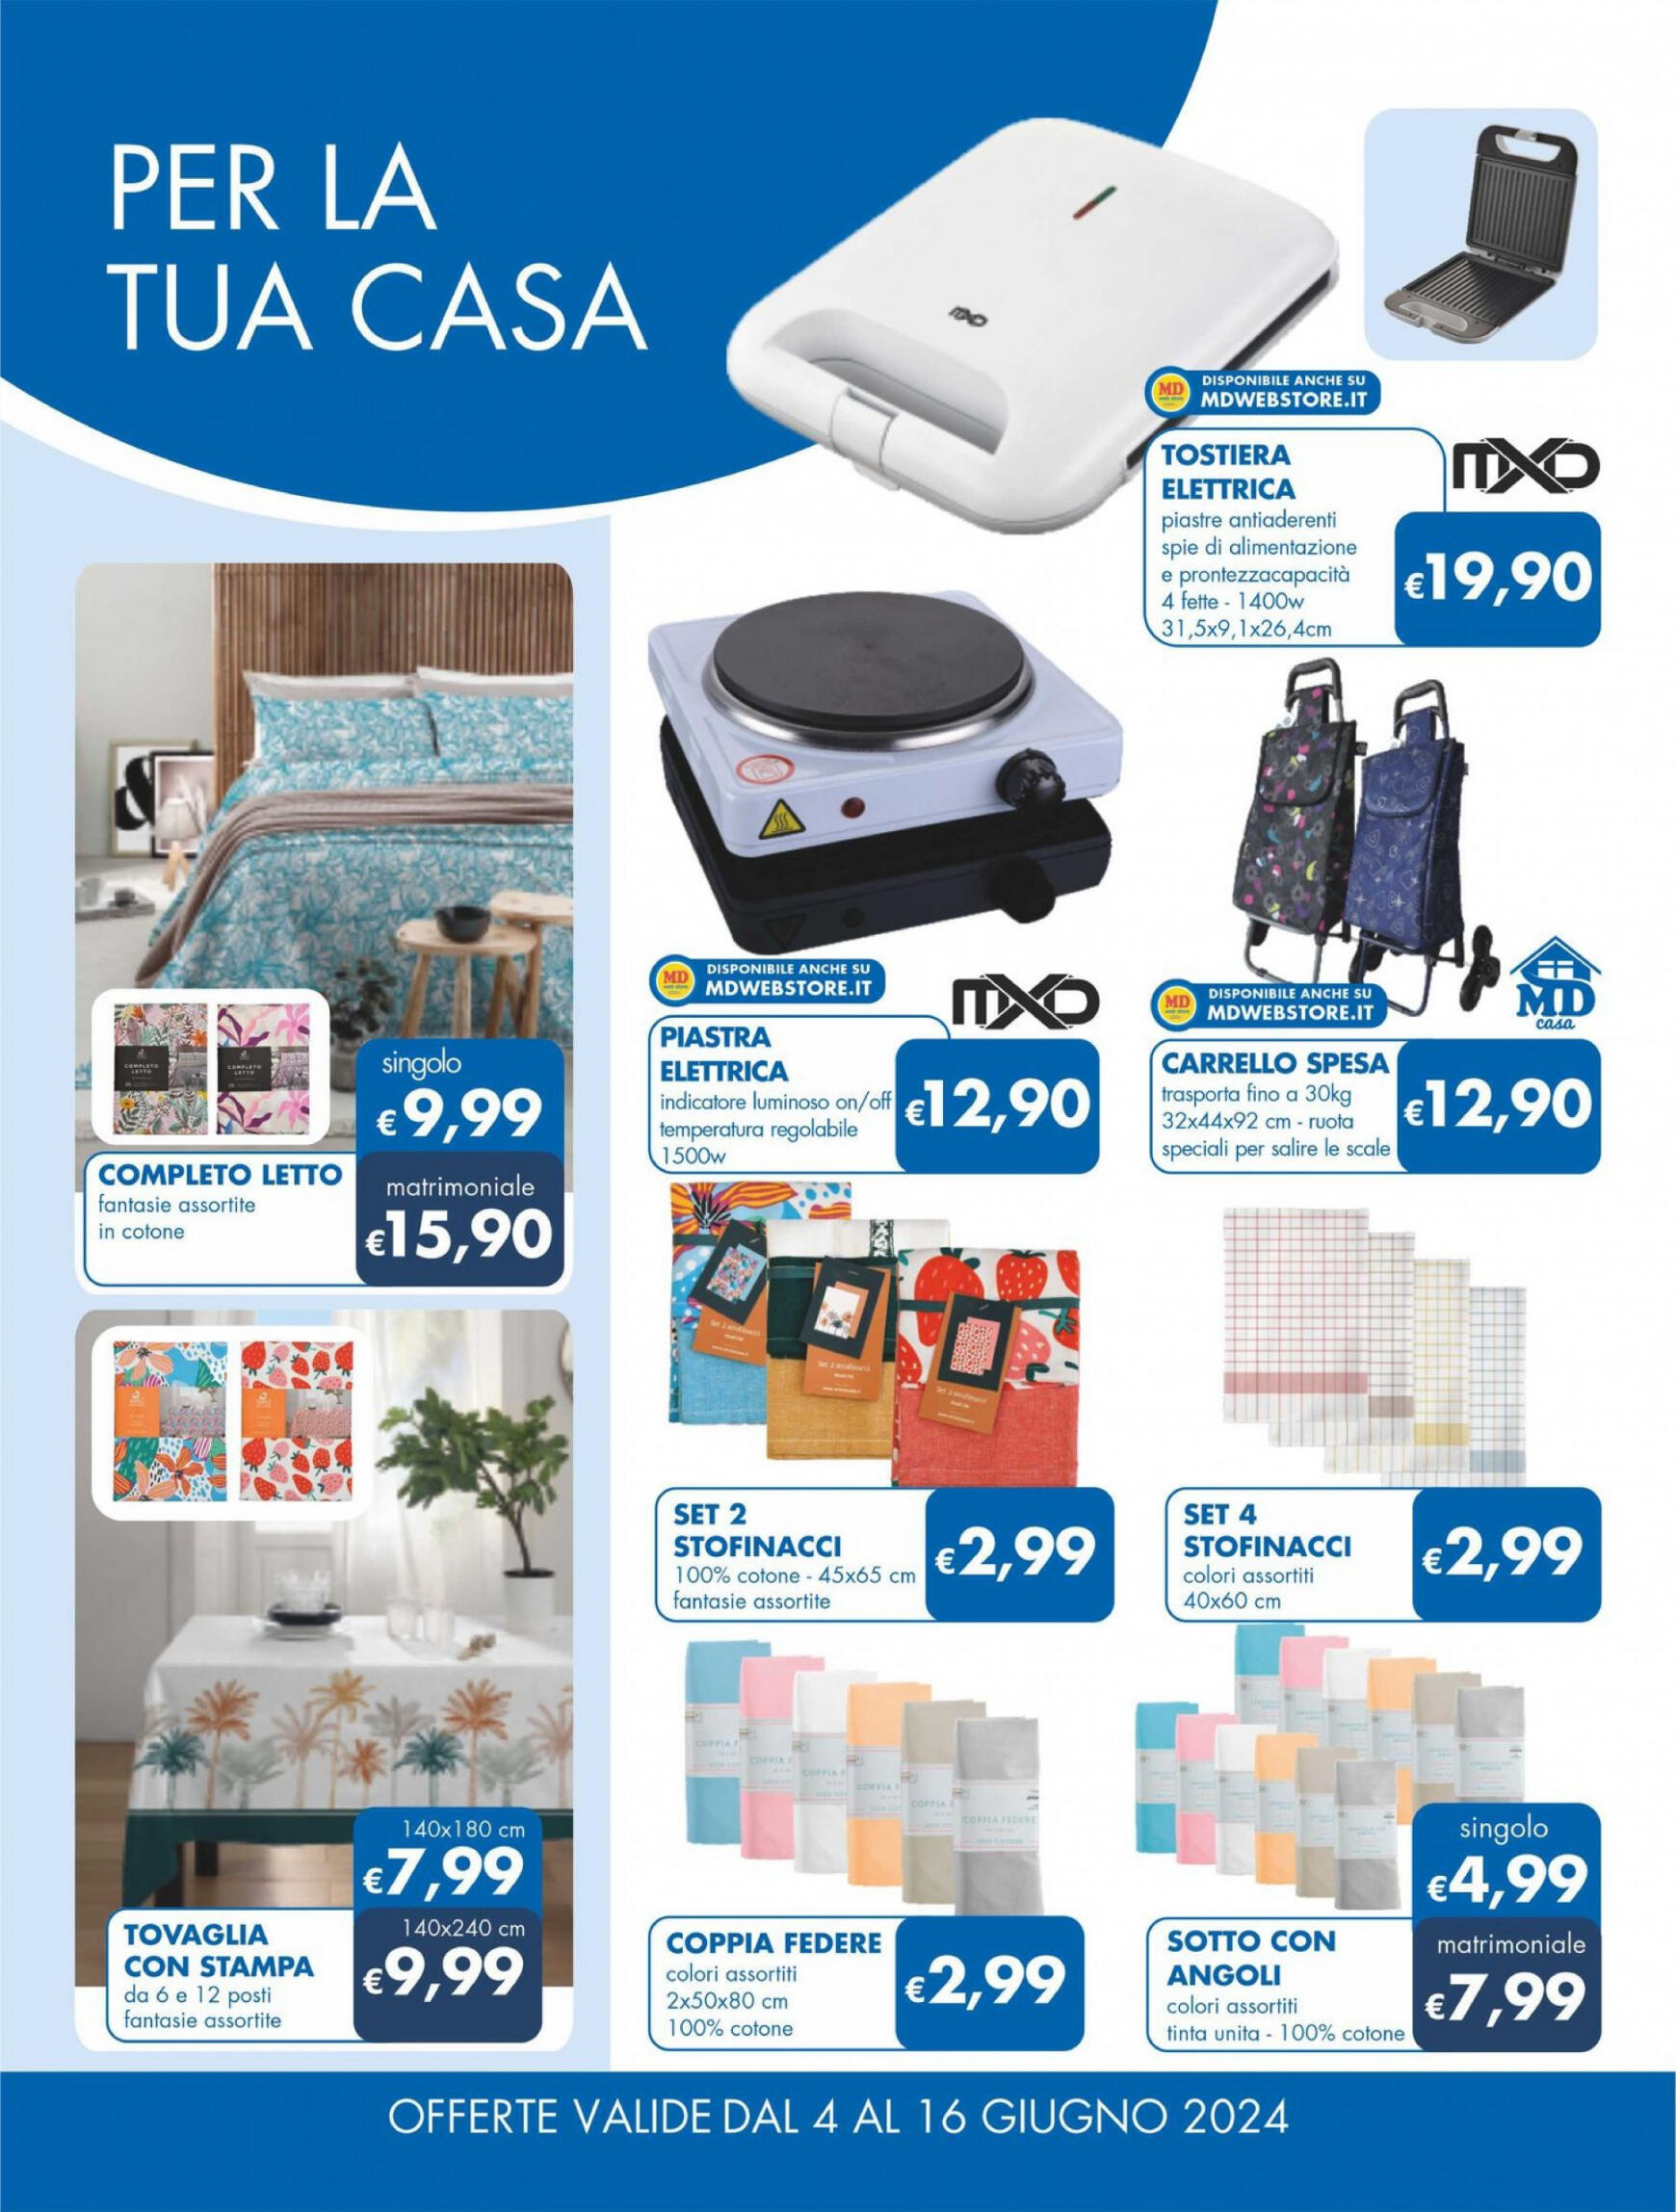 md-discount - Nuovo volantino MD 04.06. - 16.06. - page: 26